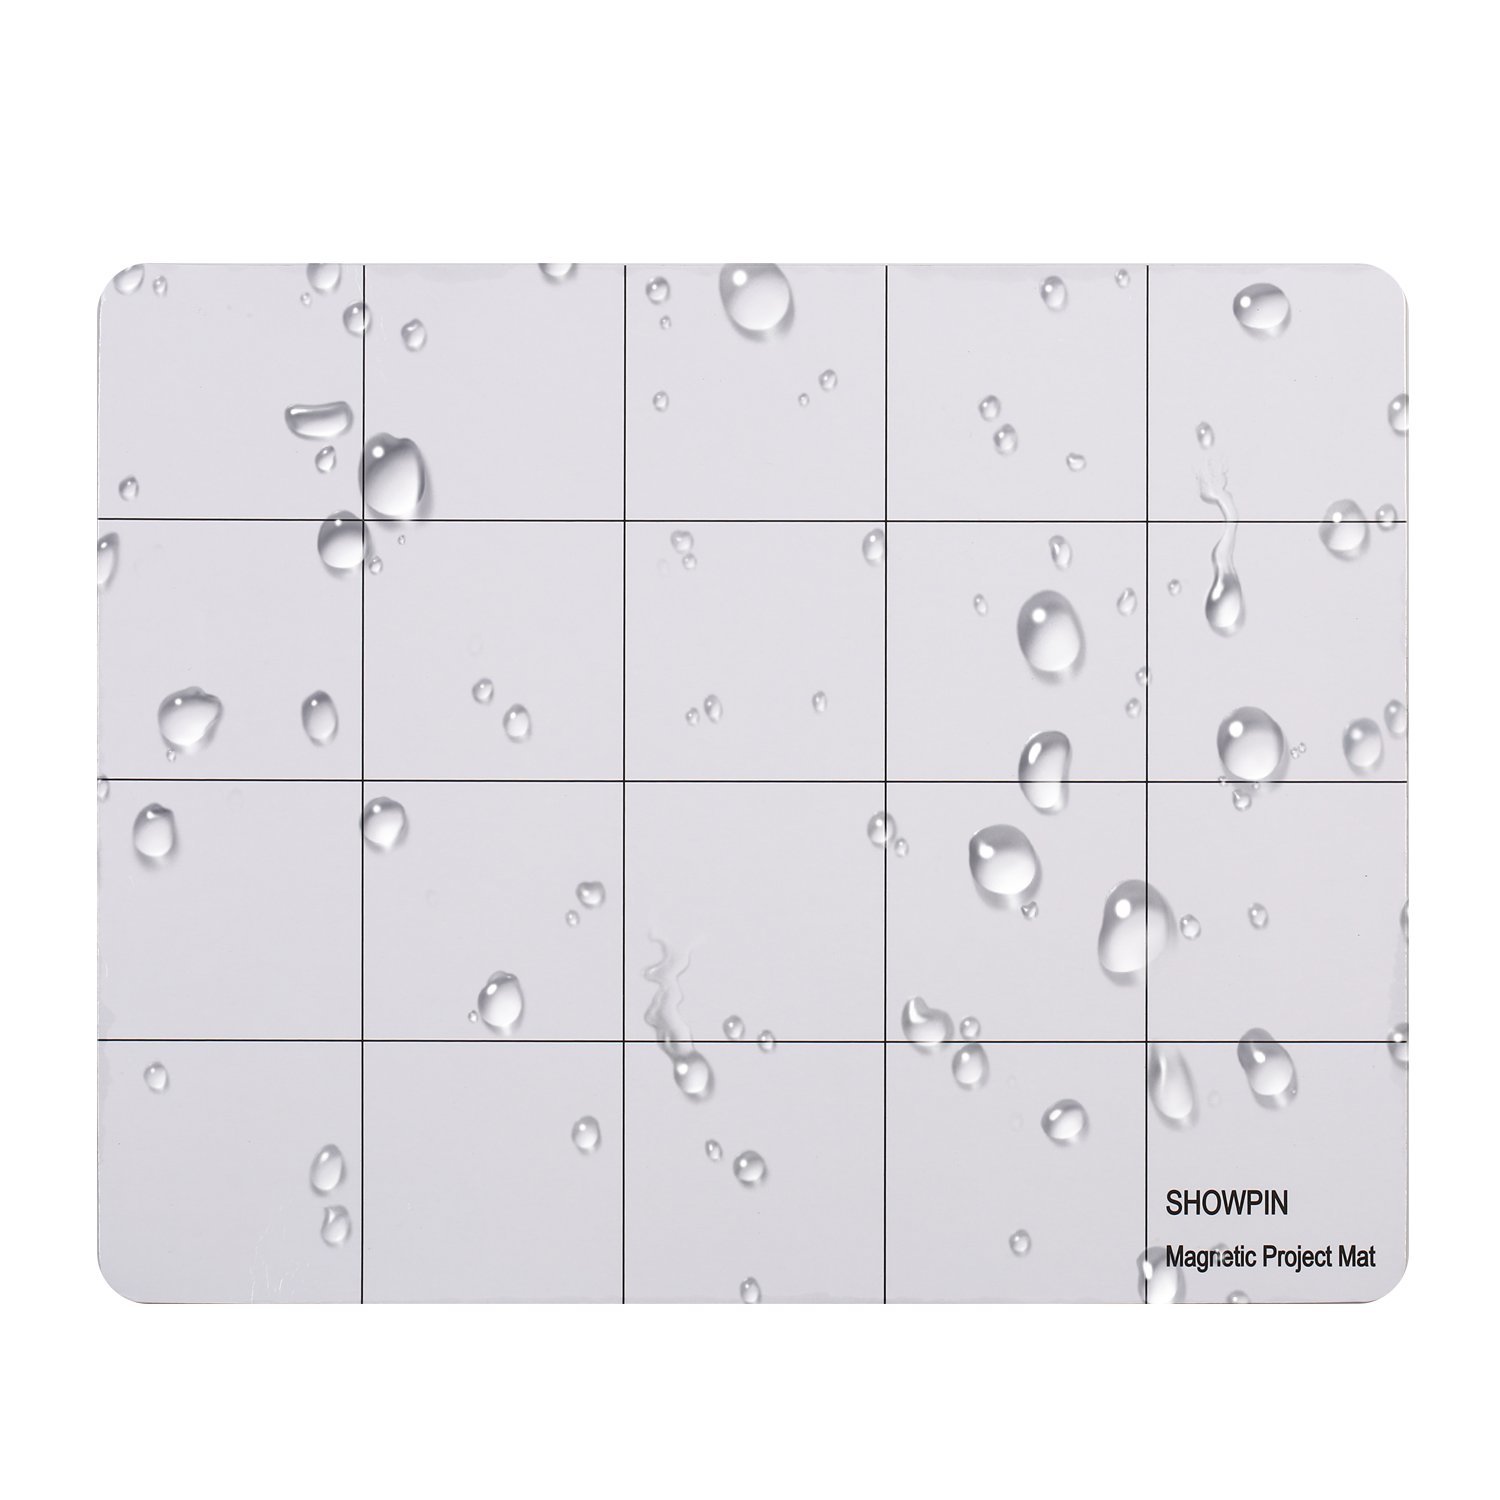 SHOWPIN Magnetic Project Mat Prevent Small Electronics Losing Rewritable Work Surface Mat